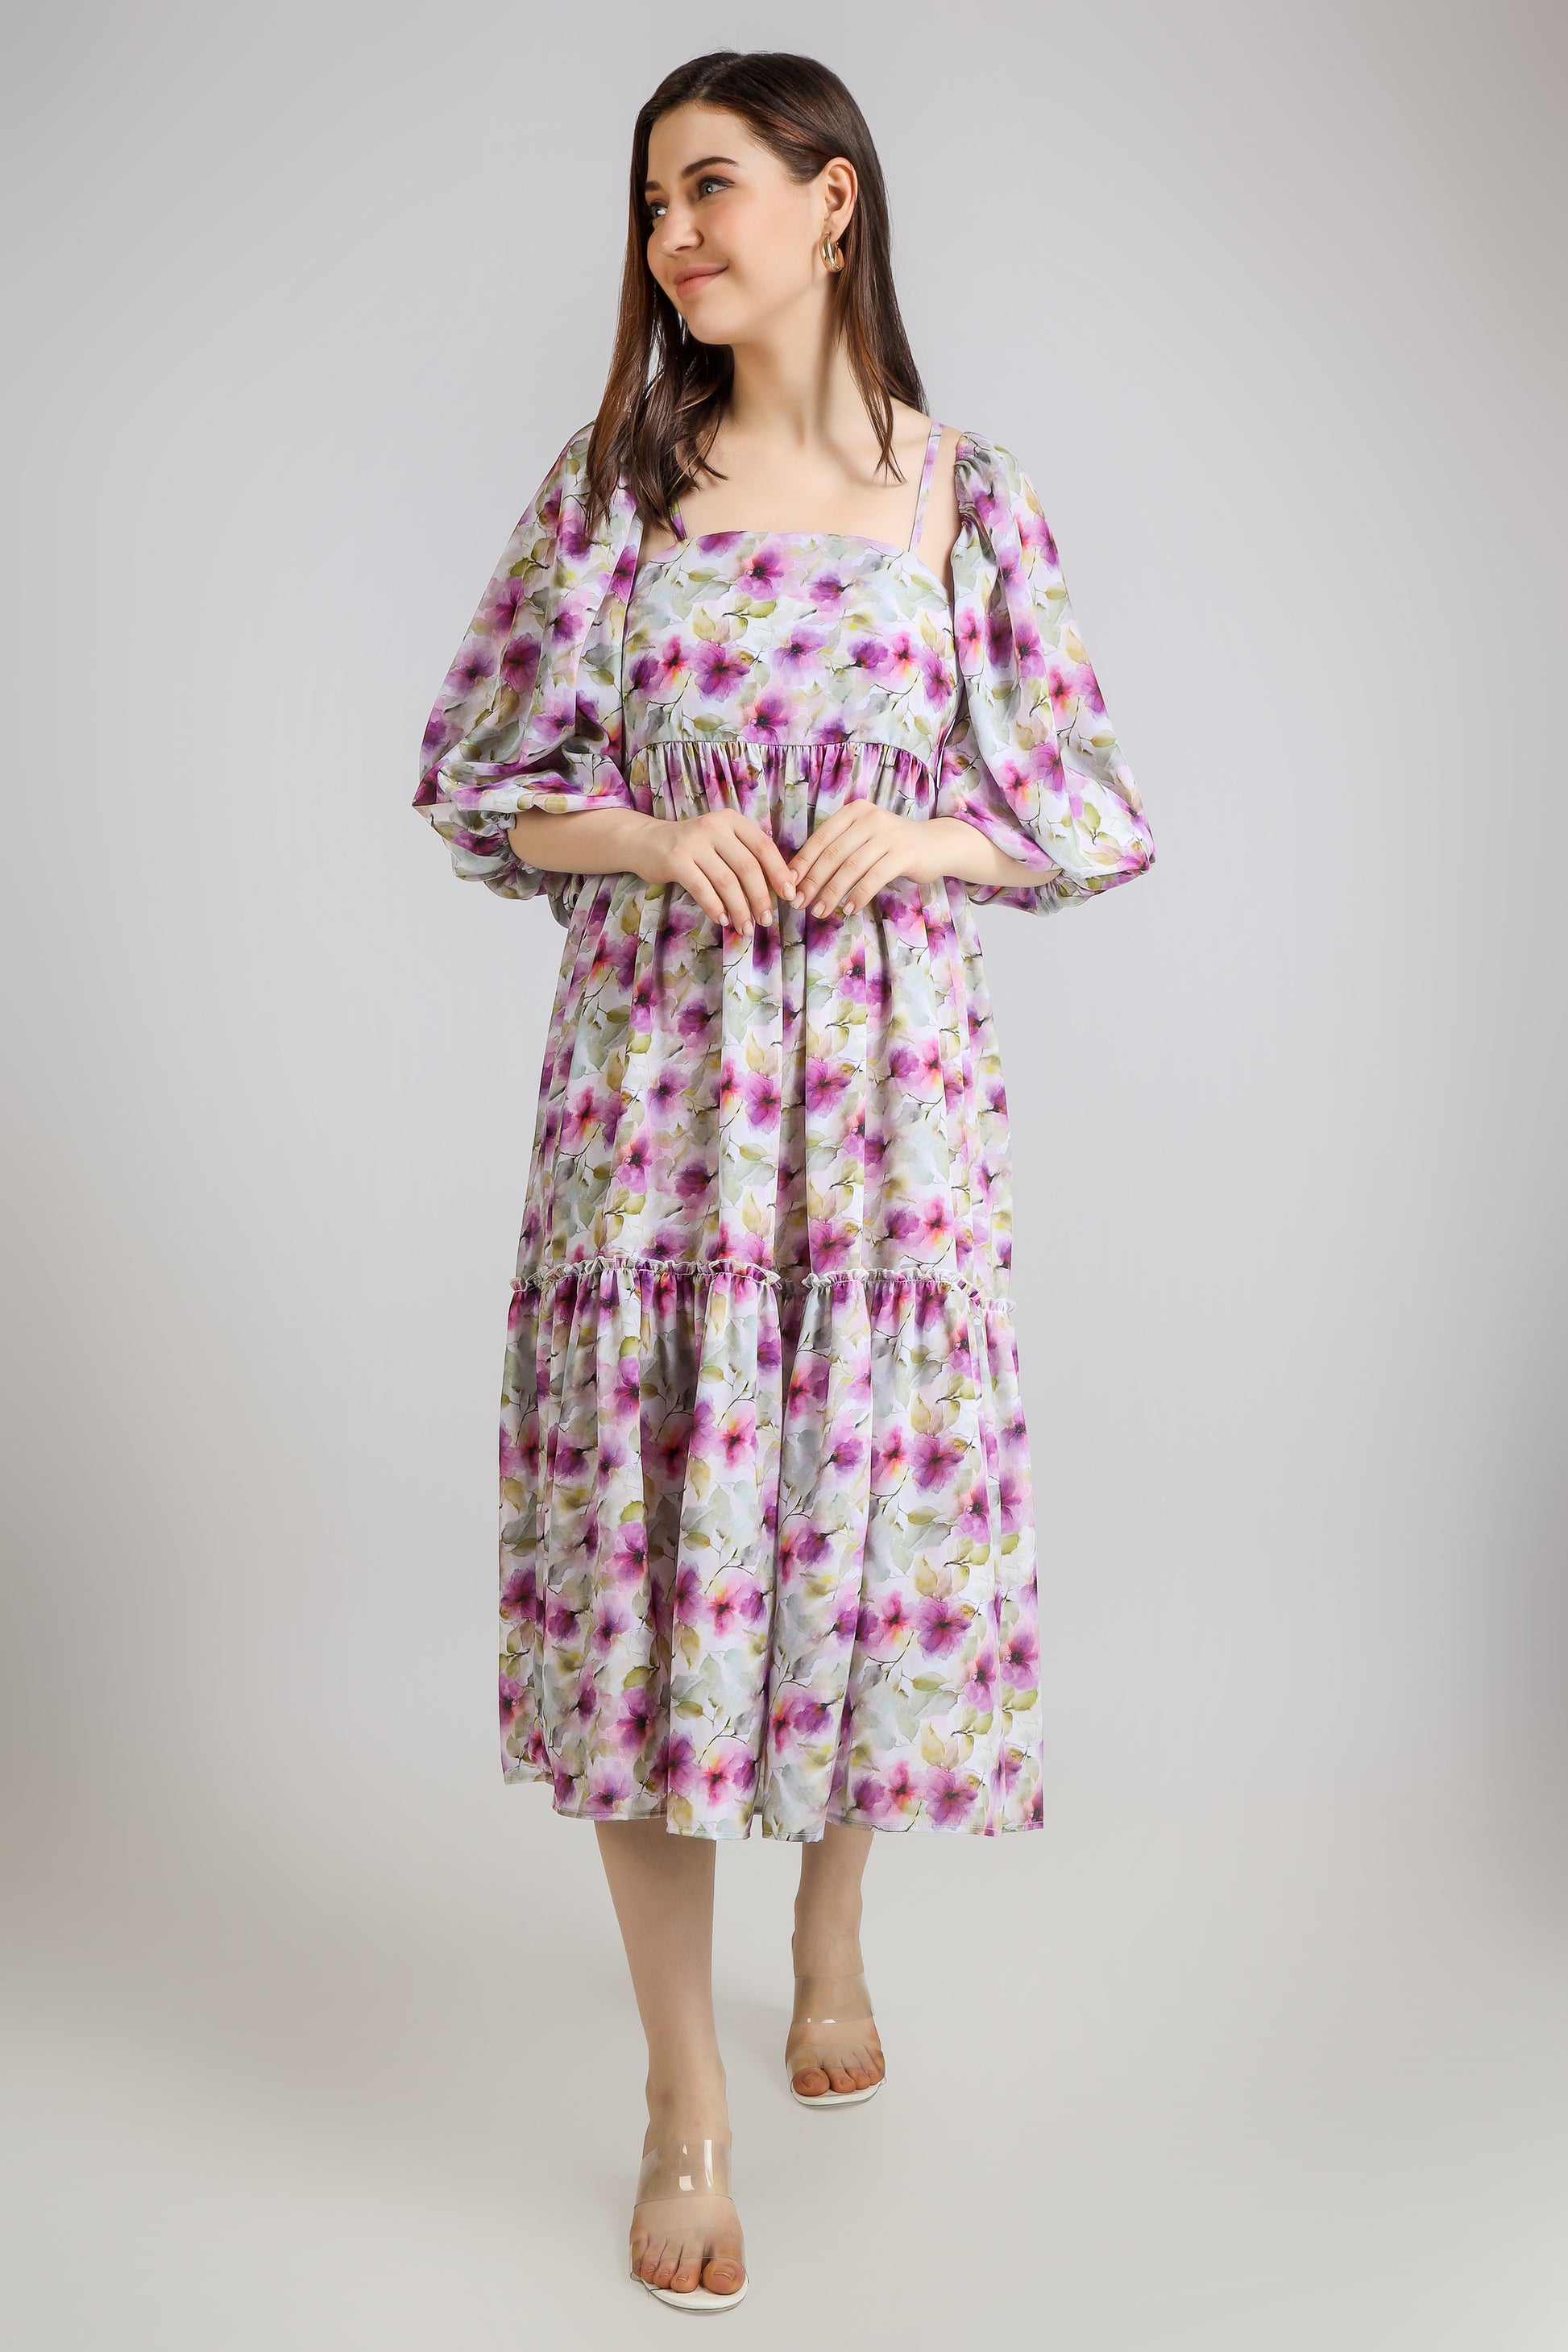 Vomendi Floral Tie and Dye Print Dress with Smocking and Detachable Sleeves